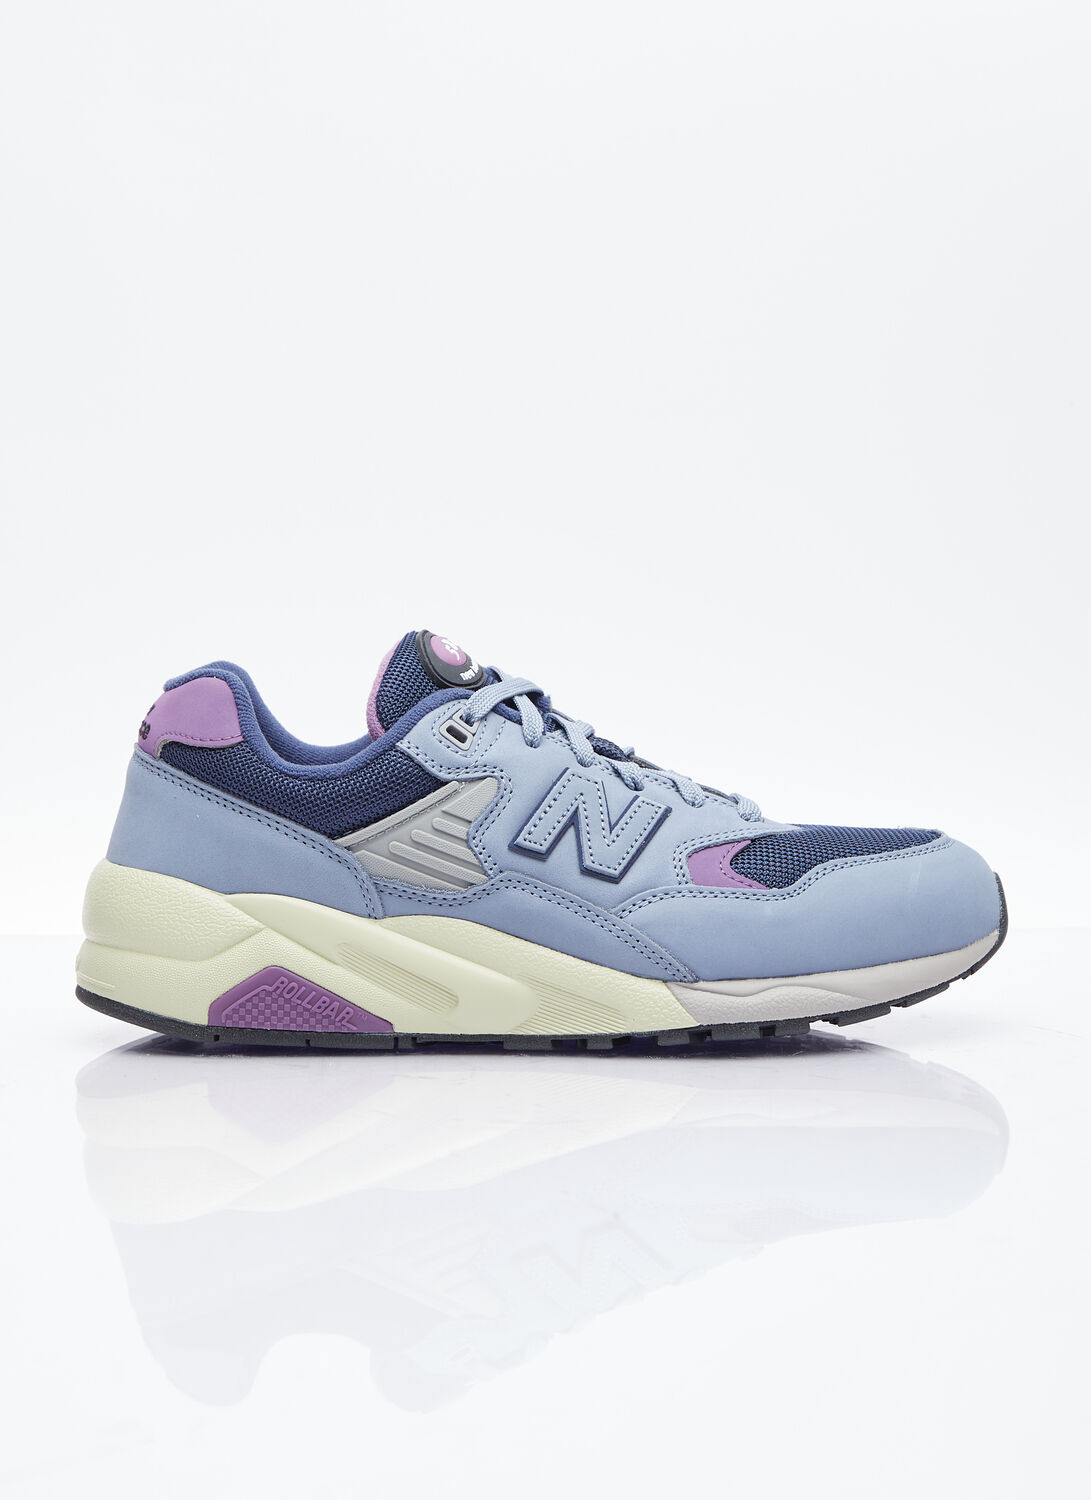 New Balance 580 Sneakers In Grey